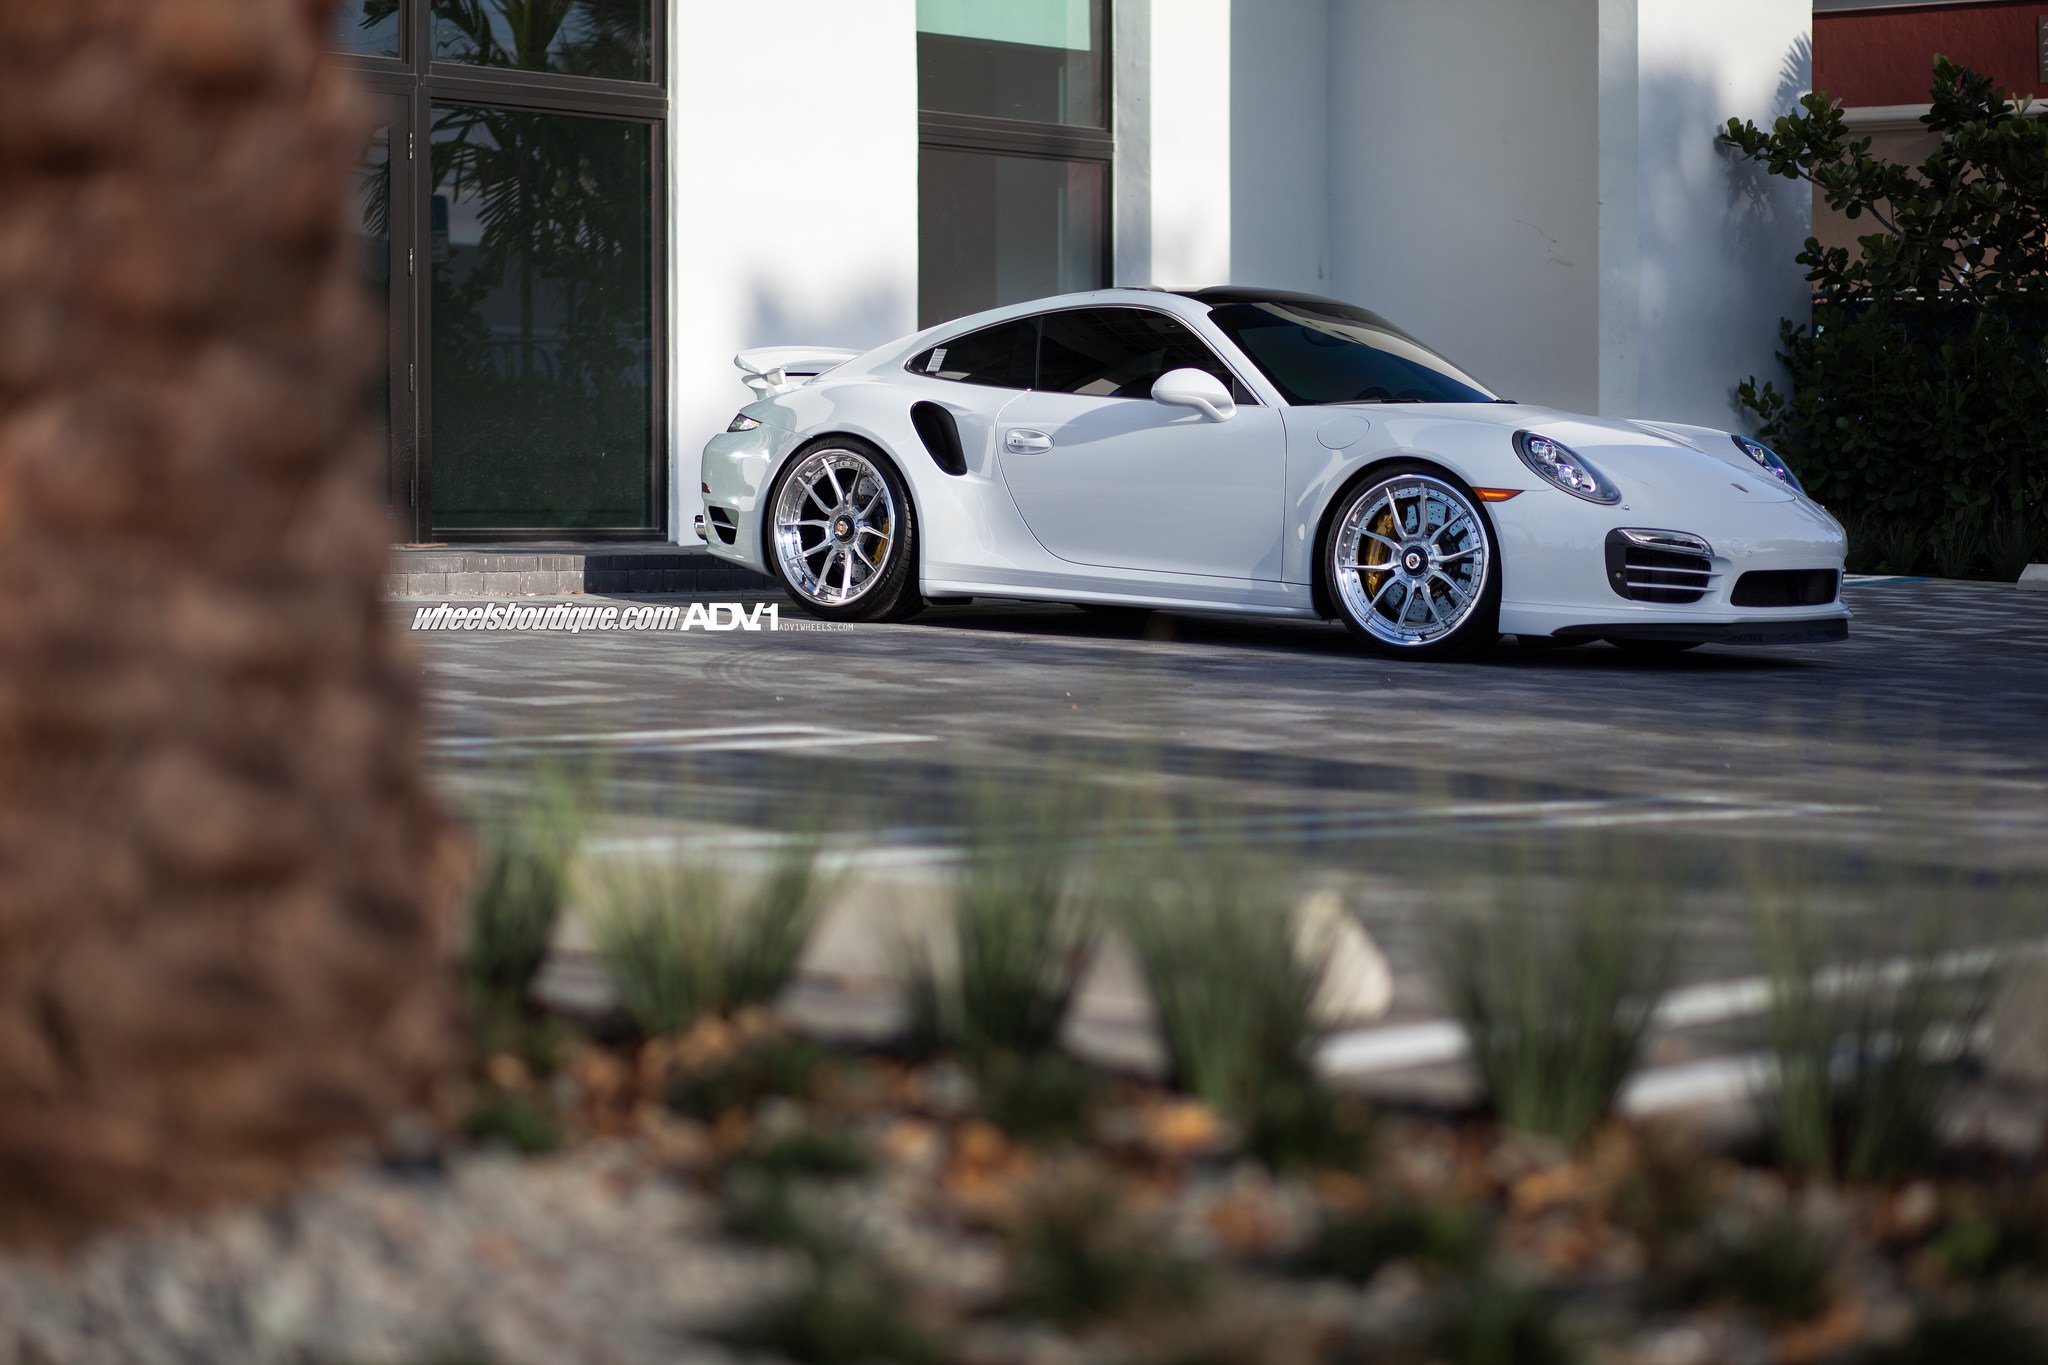 adv, And, Wheels, Gallery, Porsche, 991, Turbo s, Cars, Tuning, White Wallpaper